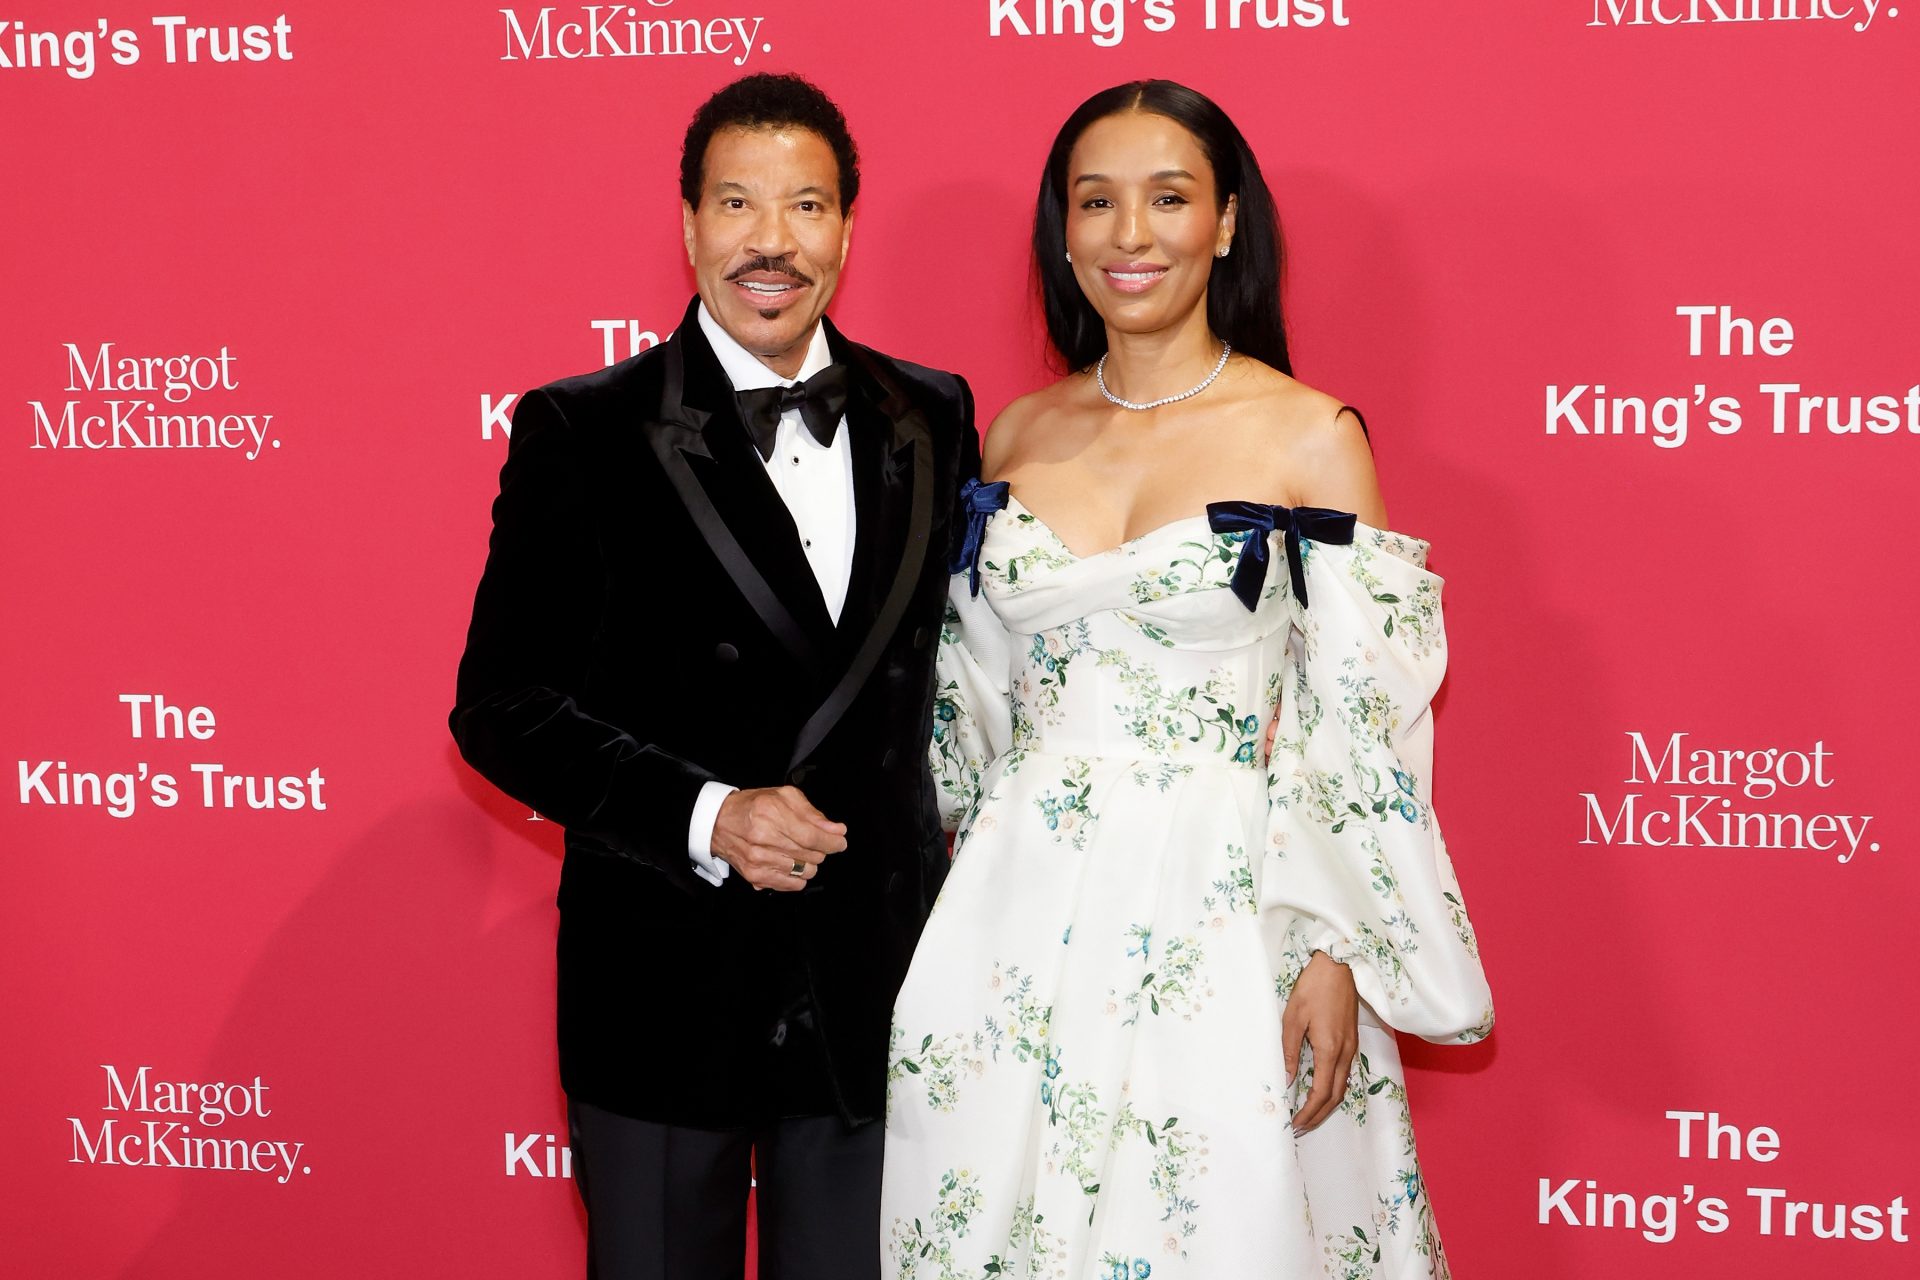 Lisa Parigi and Lionel Richie at the King's Trust Global Gala